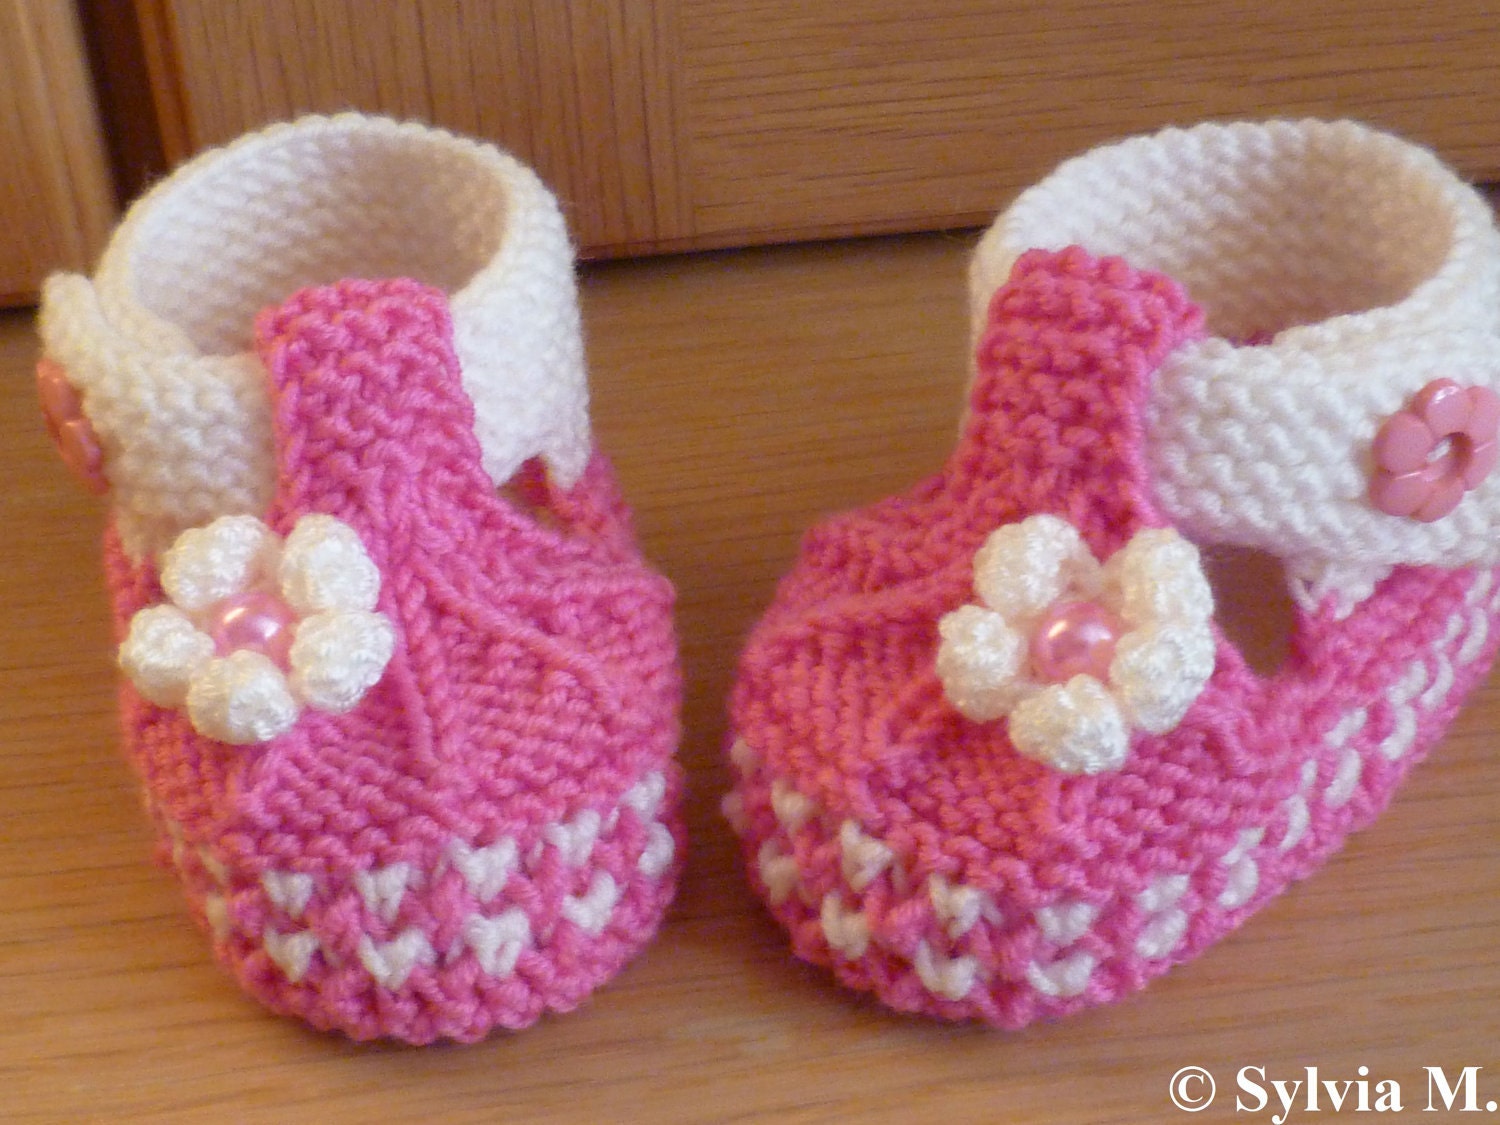 Knitted baby shoes / sandals for 0-6 months /9cm /3,5 inch new